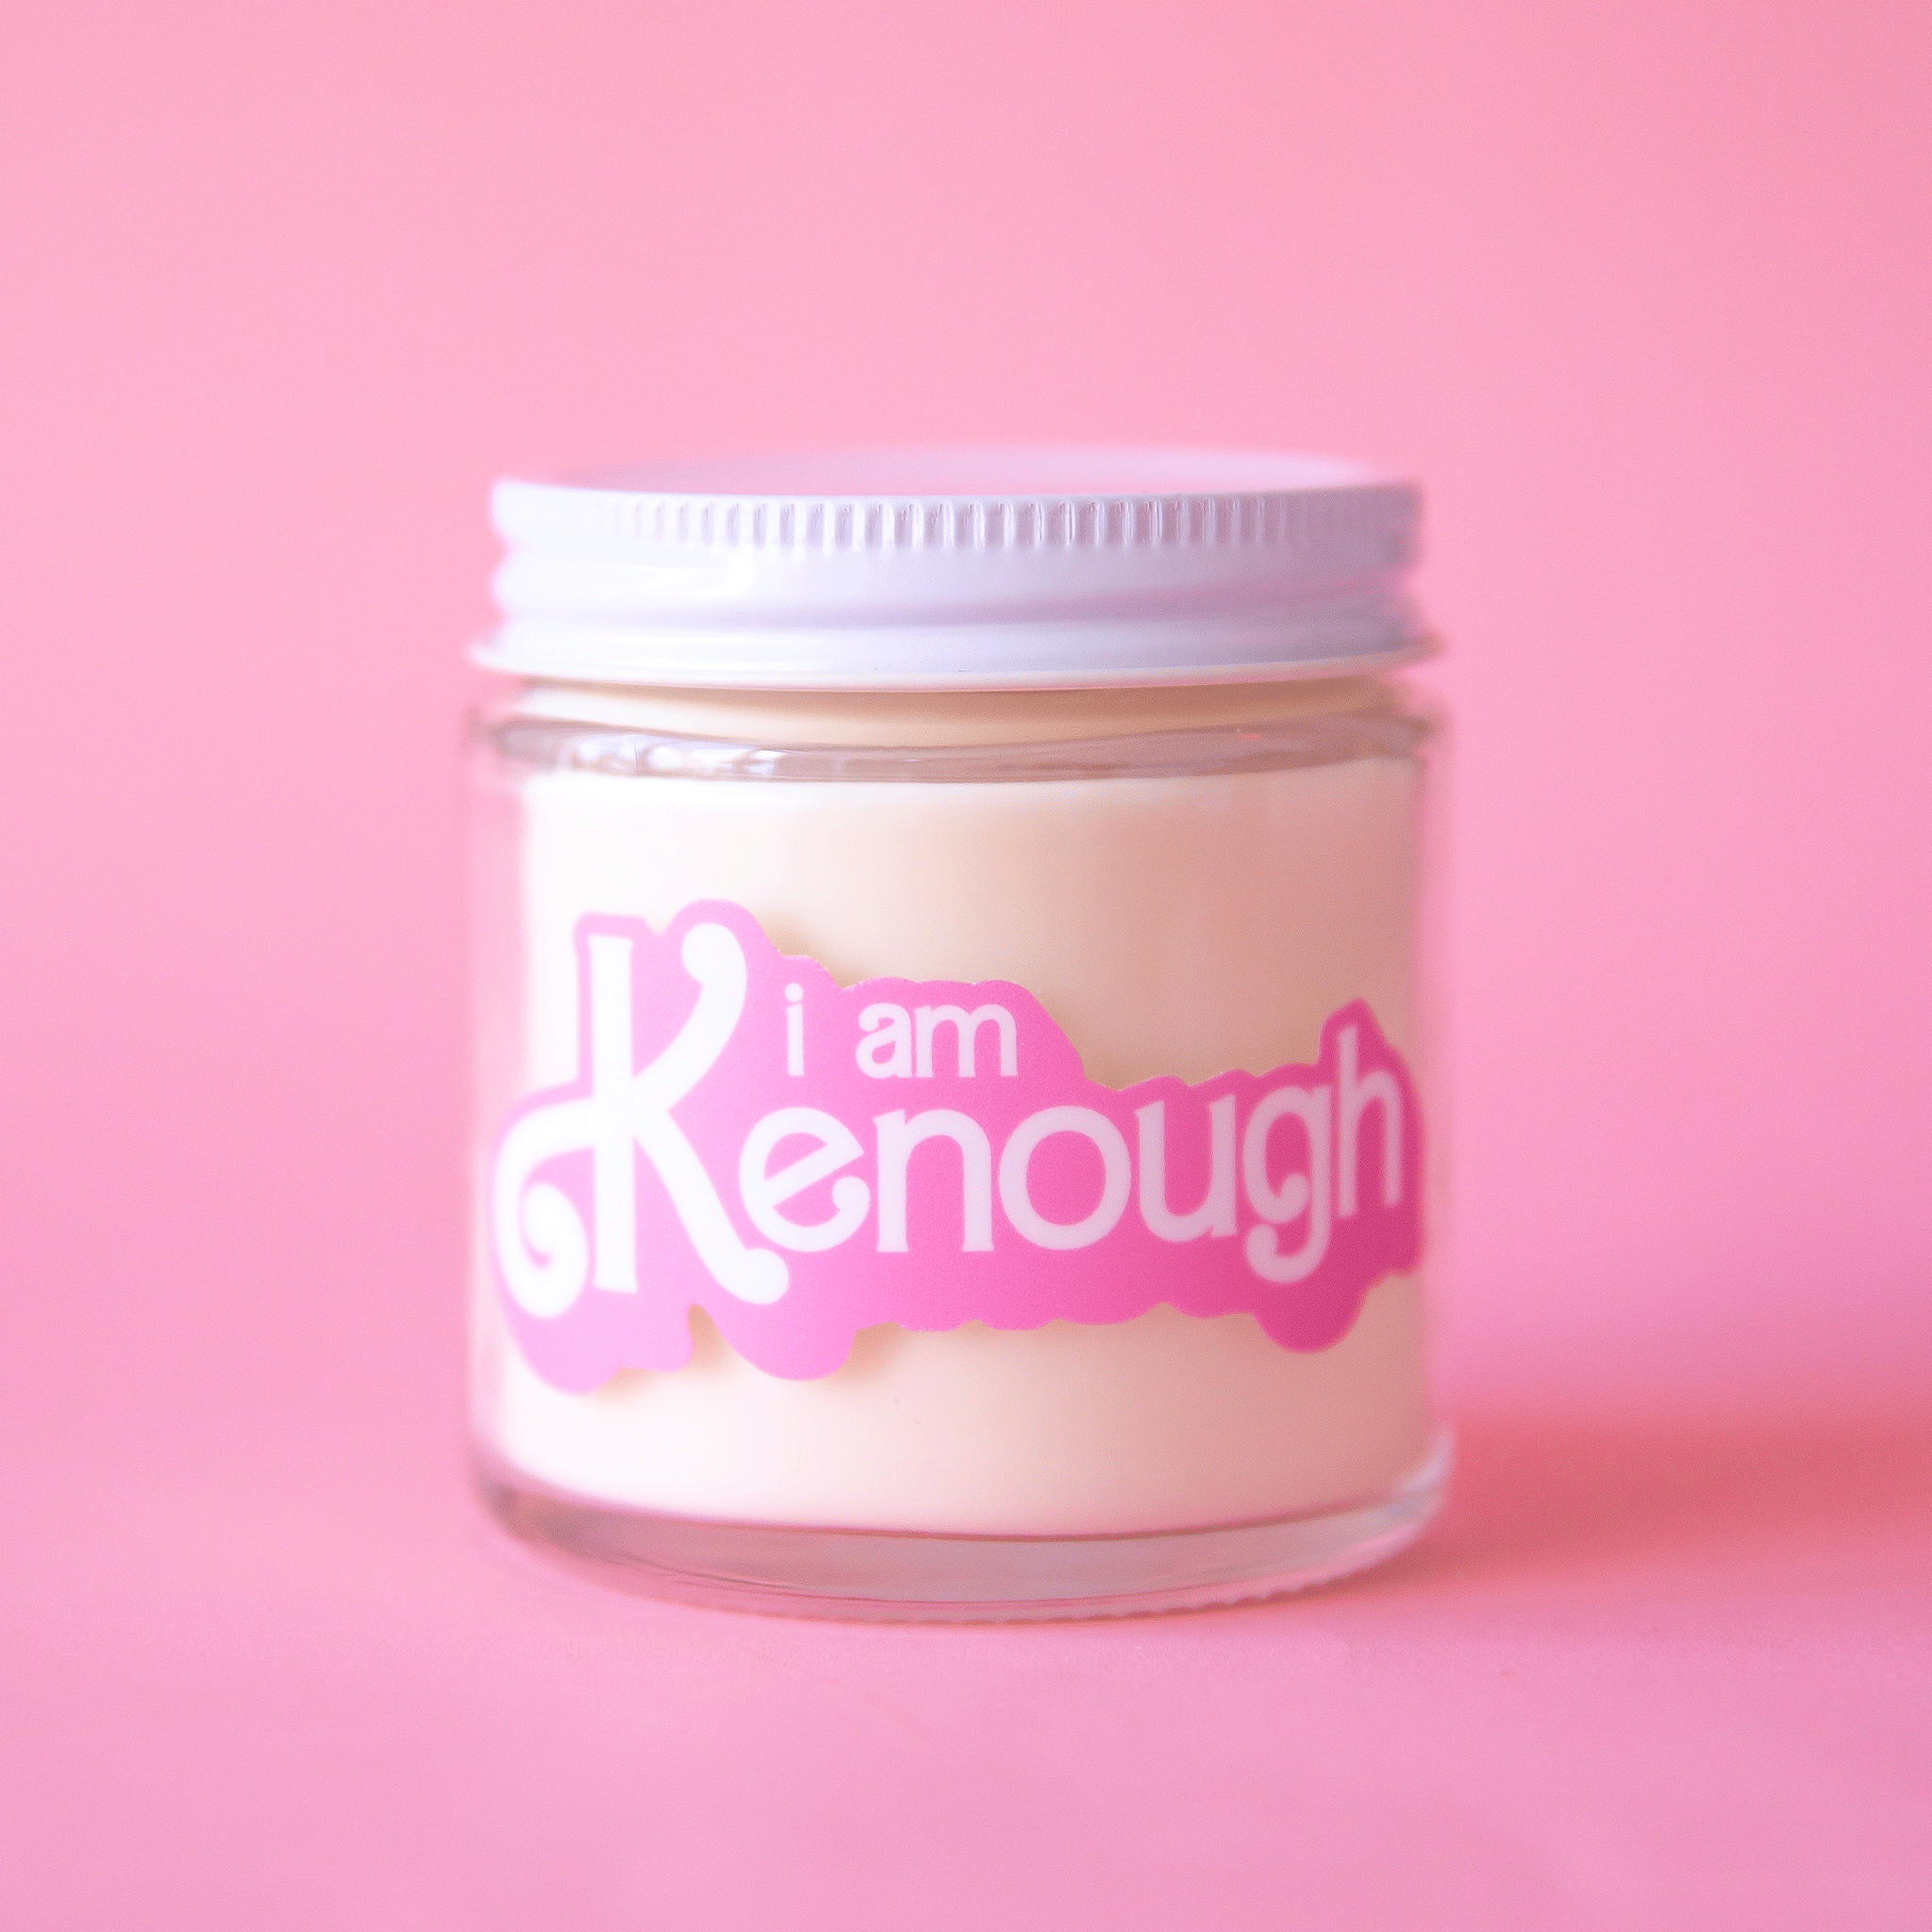 On a pink background is a glass candle with a white lid and pink text on the front that reads, "I am Kenough".